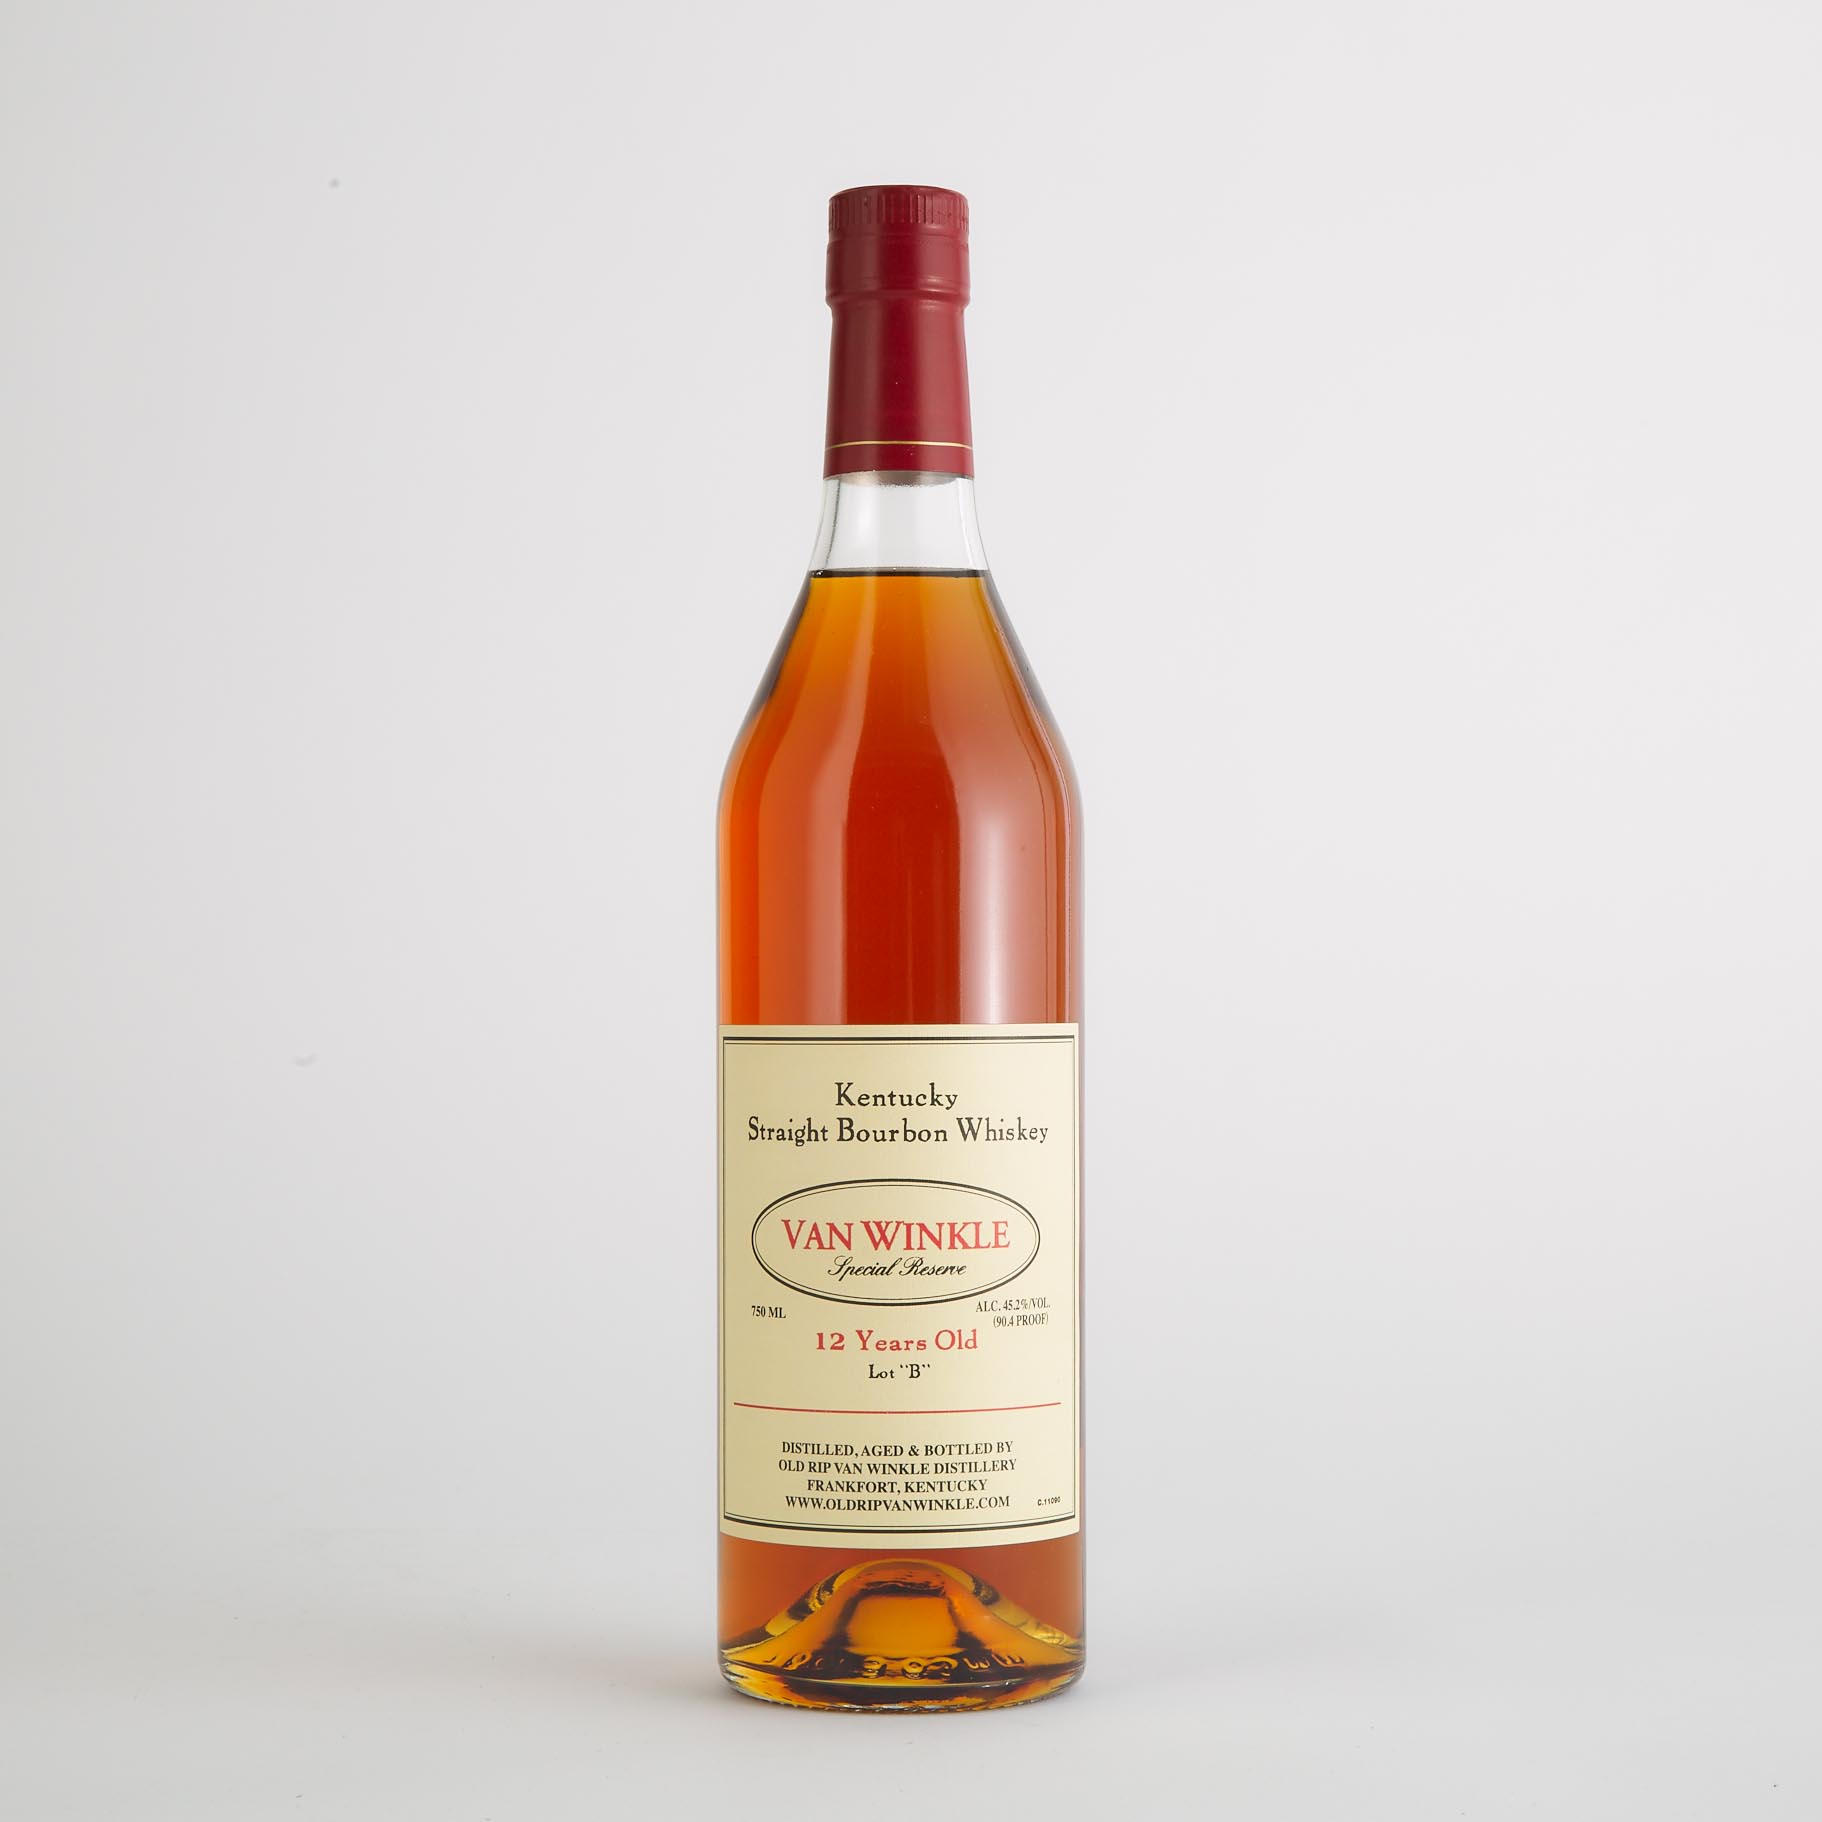 VAN WINKLE SPECIAL RESERVE "LOT 'B'" KENTUCKY STRAIGHT BOURBON WHISKEY 12 YEARS (ONE 750 ML)